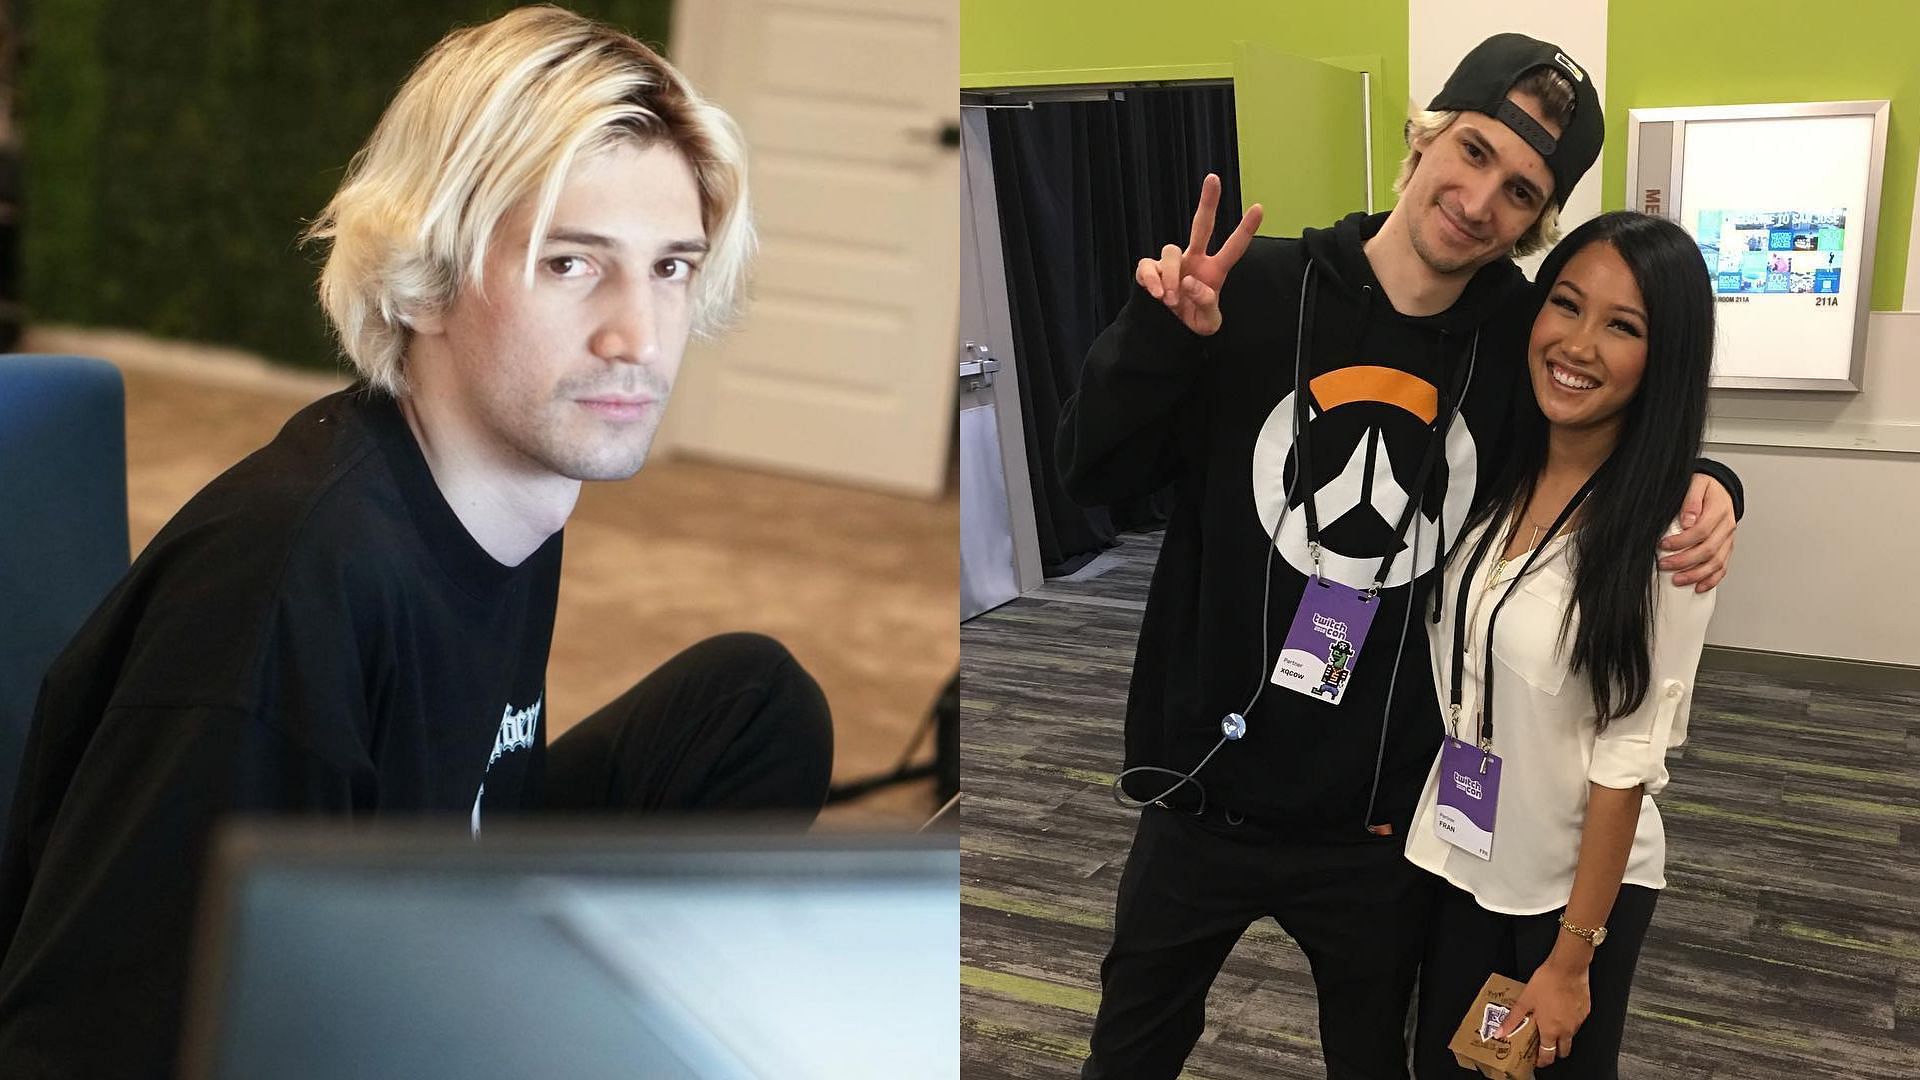 xQc has broken up with his latest girlfriend Fran two months after